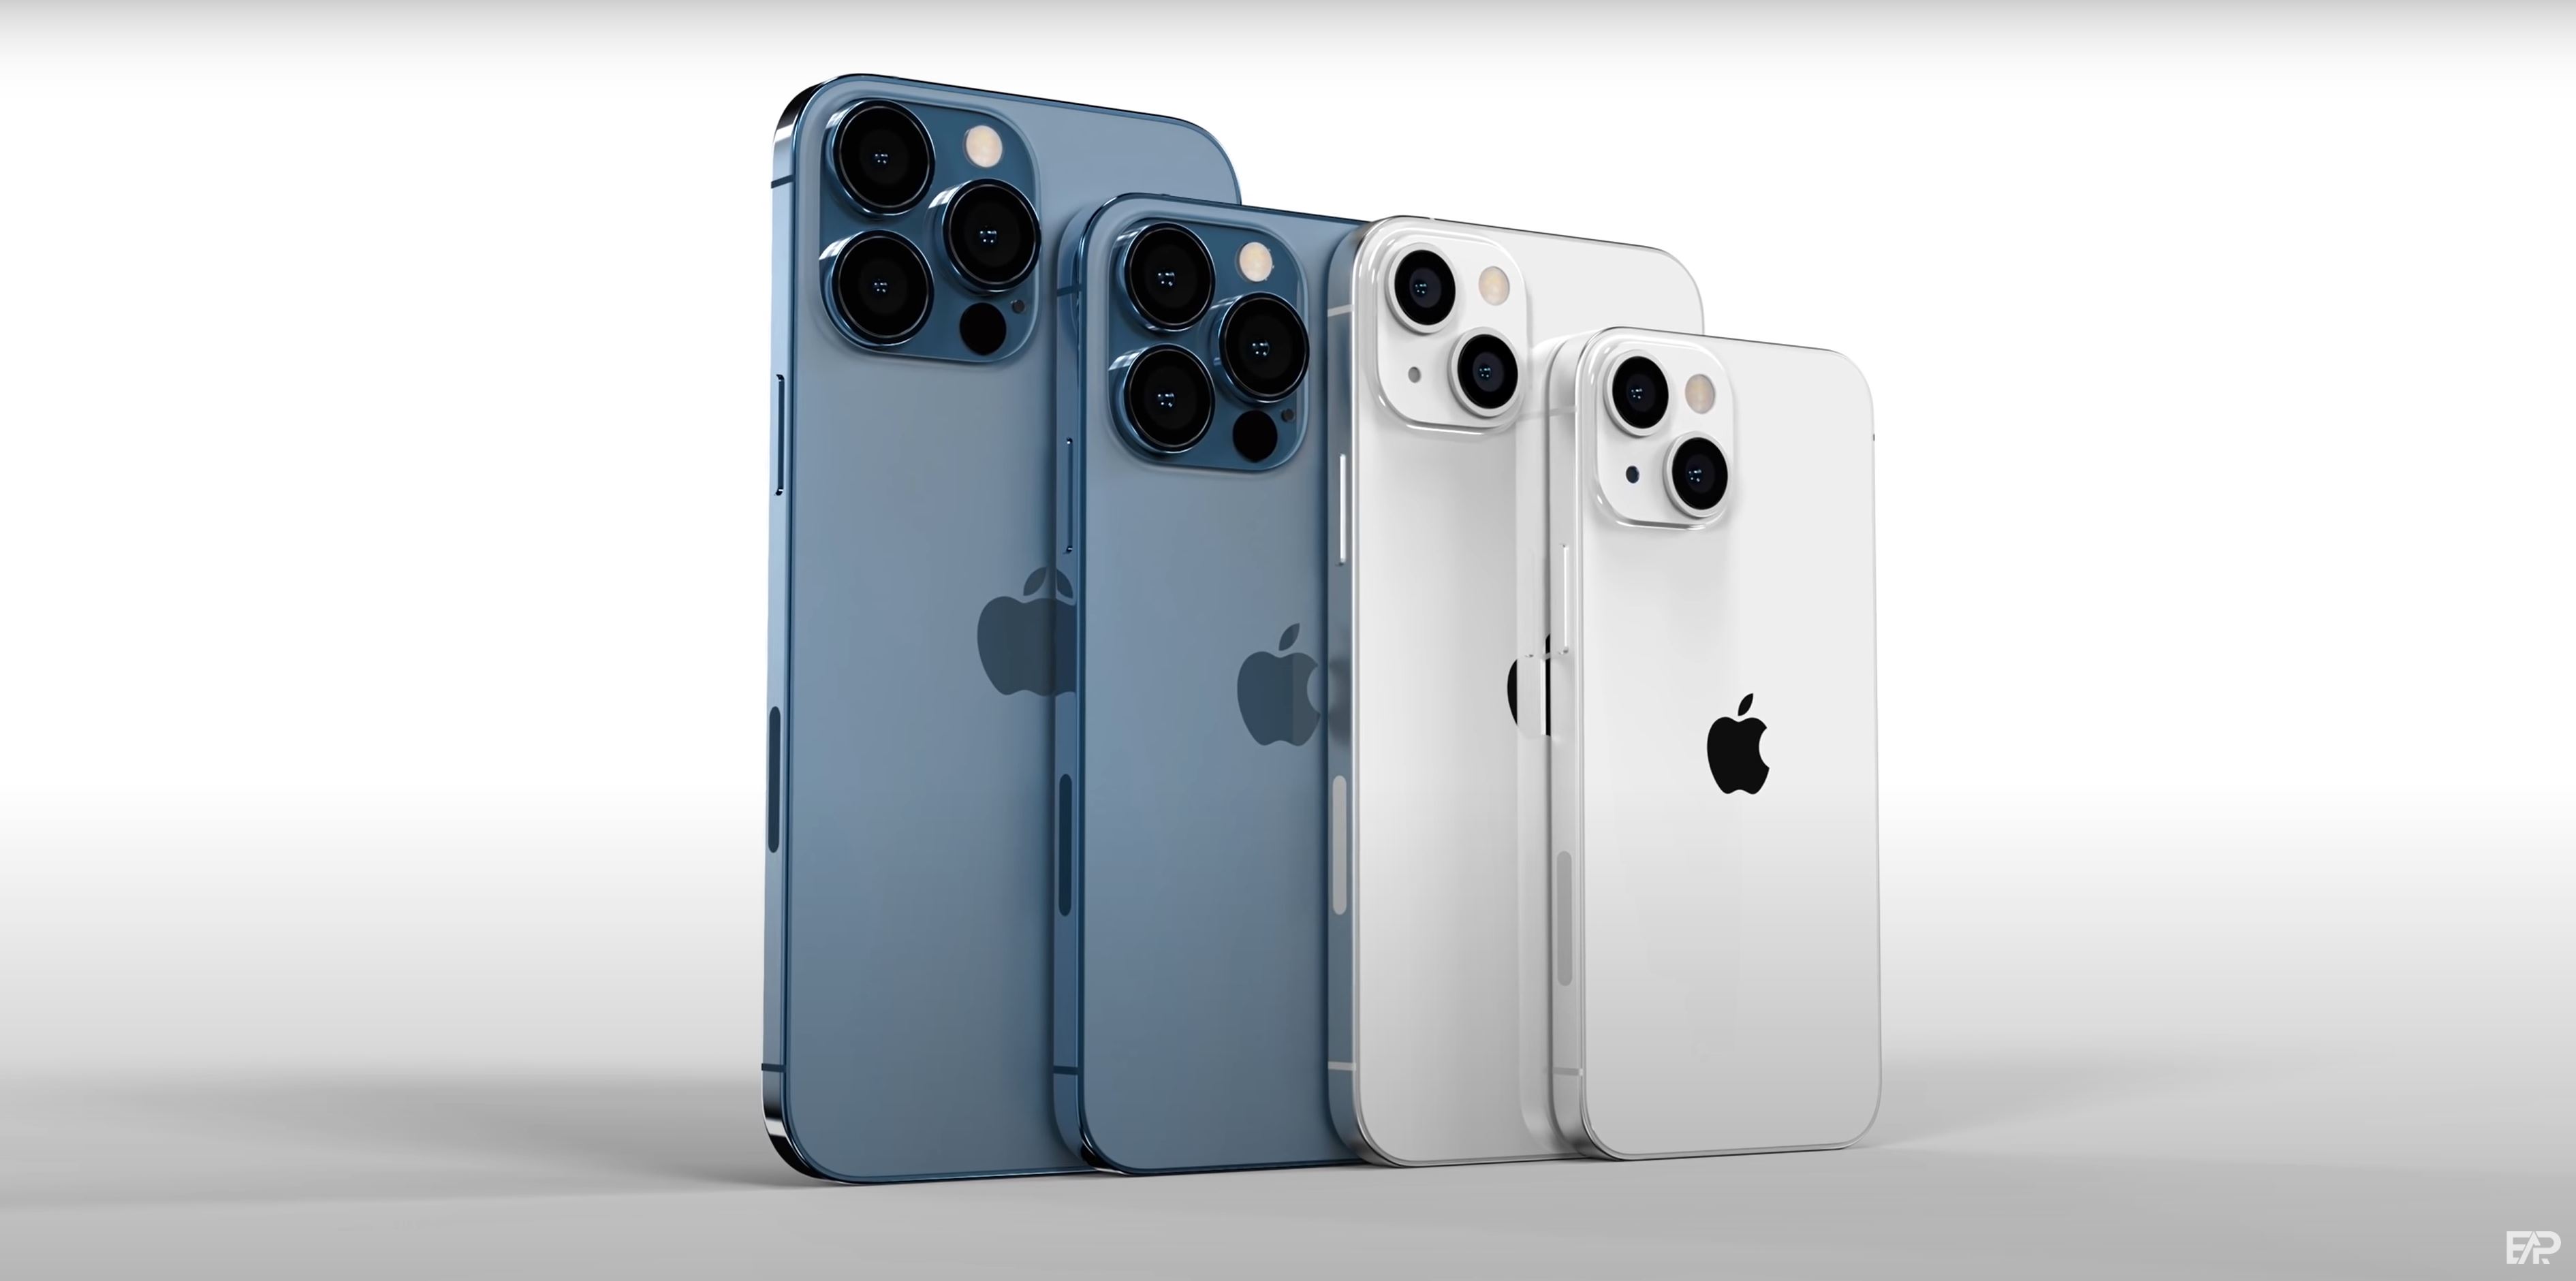 2021 iPhone Lineup (iPhone 13/12S Series)